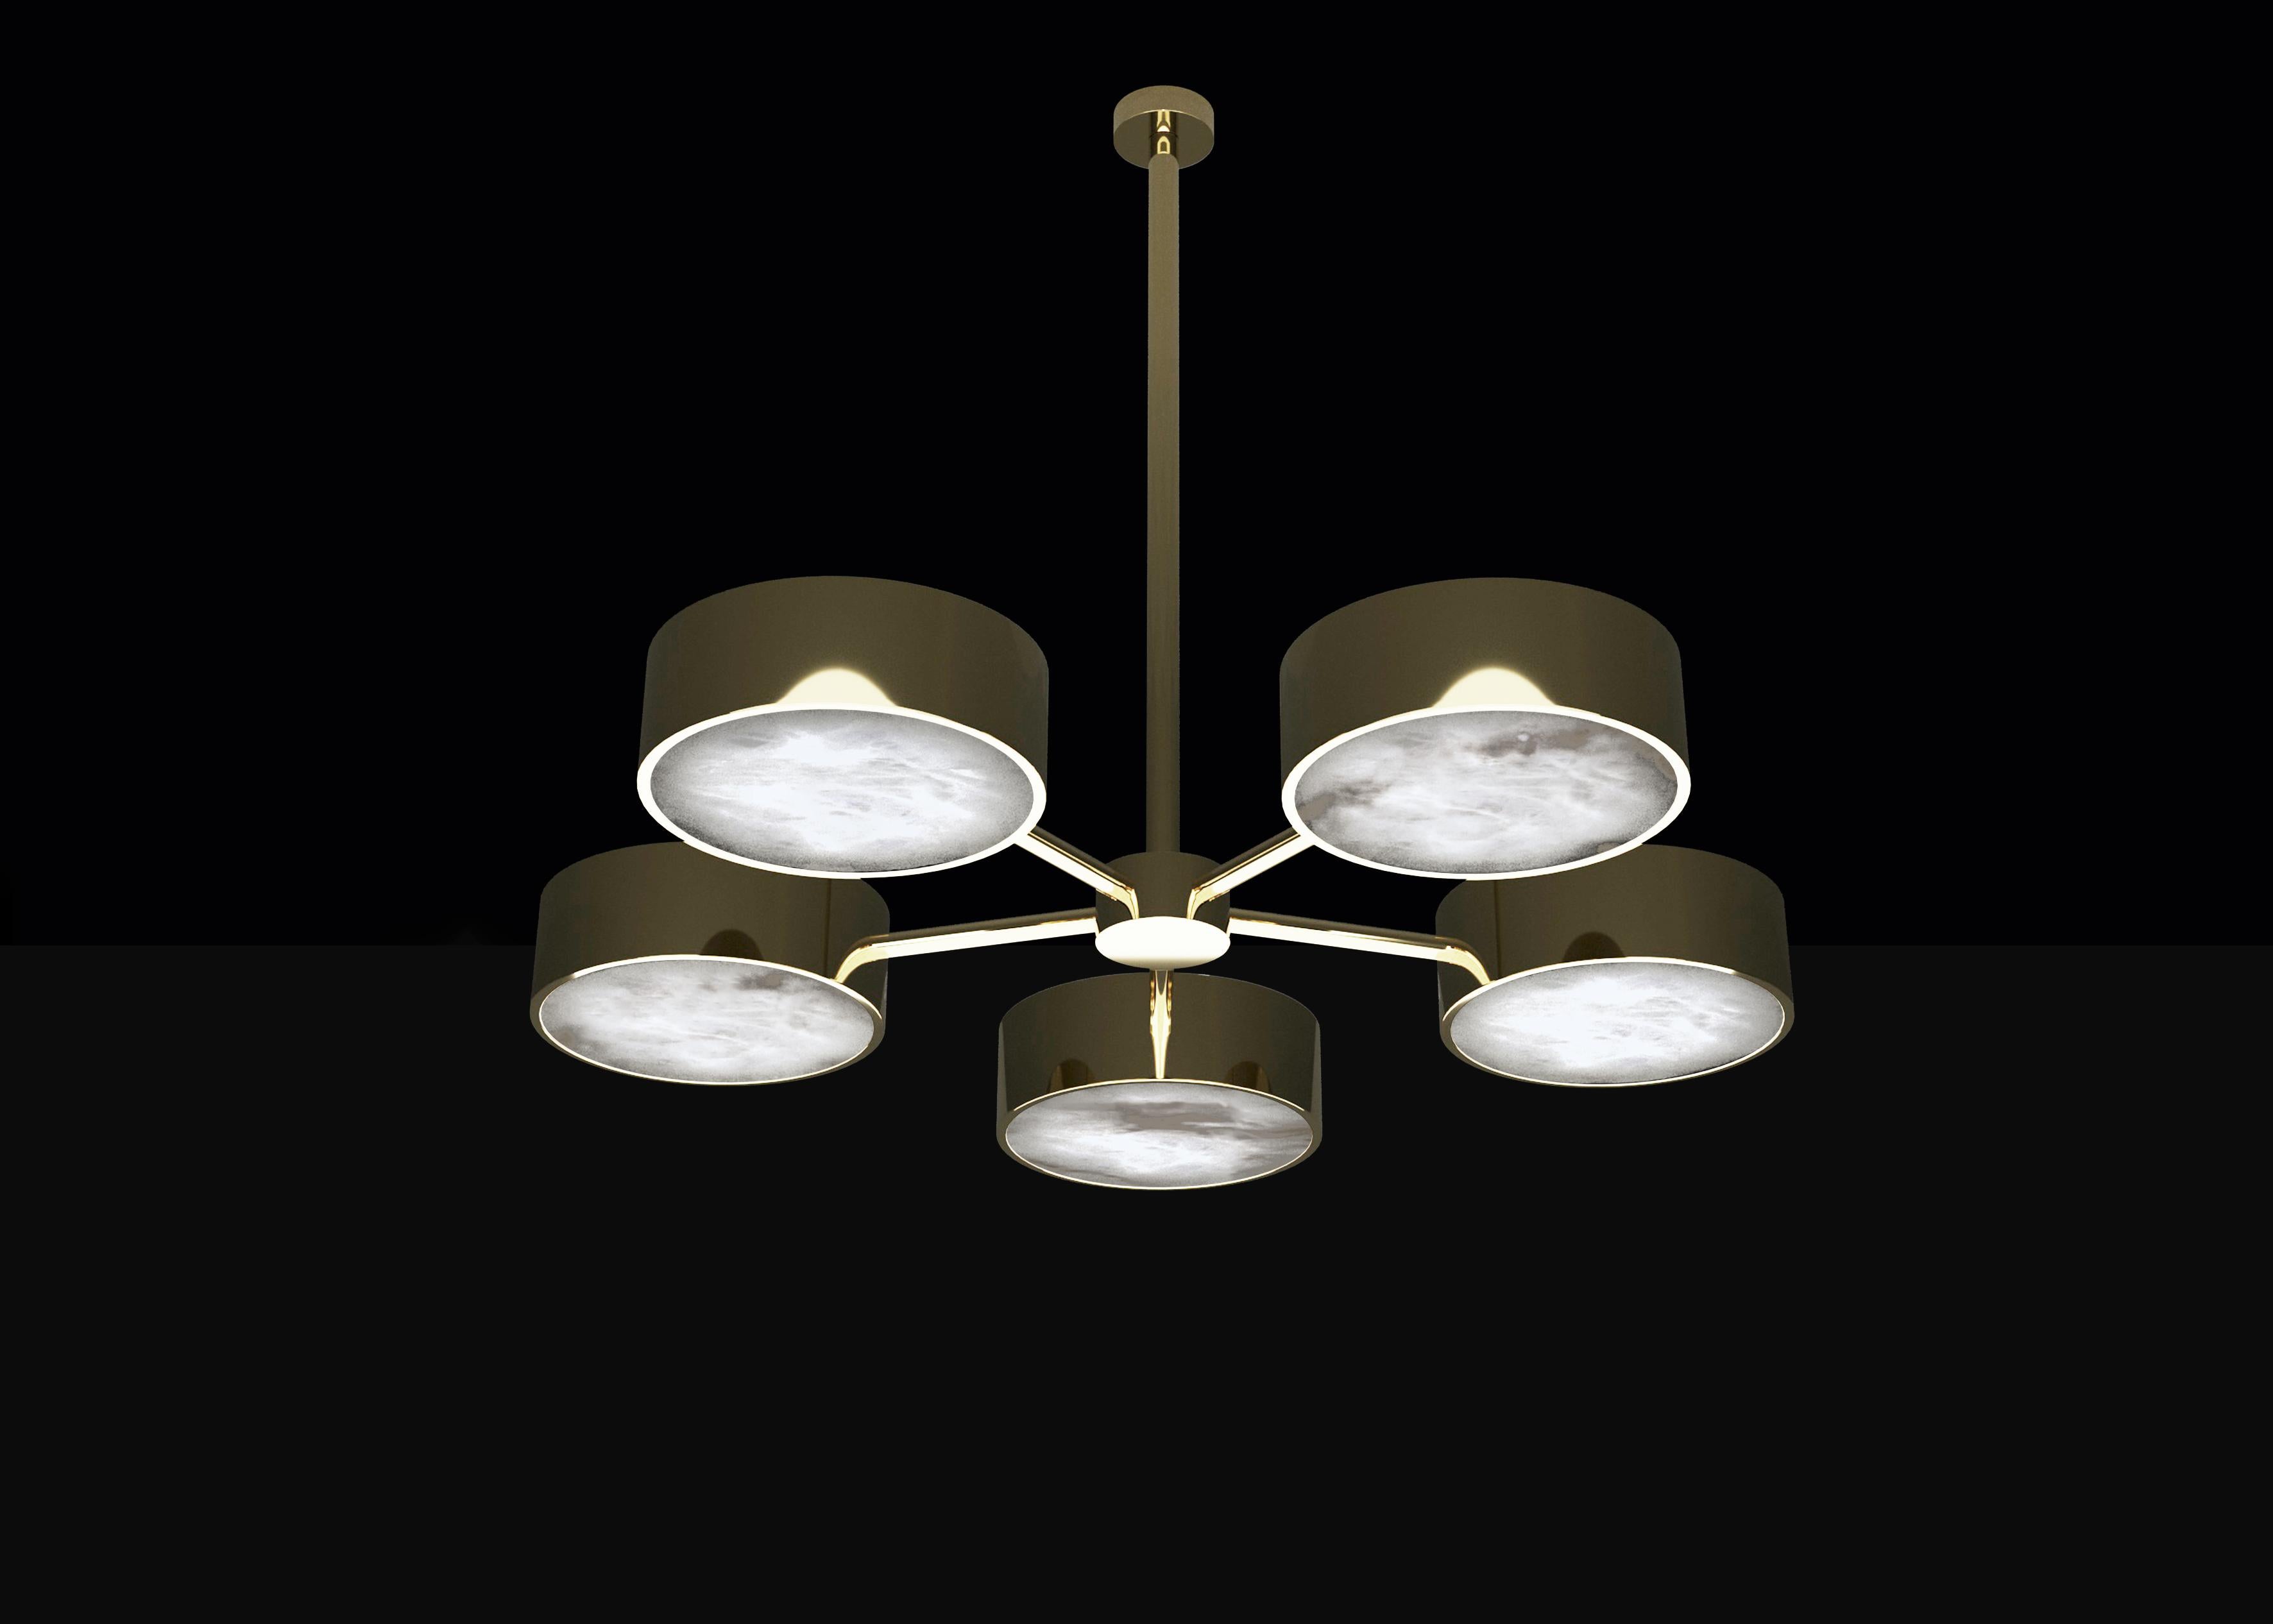 Chaos Shiny Gold Metal Chandelier by Alabastro Italiano
Dimensions: D 97 x W 100 x H 84.5 cm.
Materials: White alabaster and metal.

Available in different finishes: Shiny Silver, Bronze, Brushed Brass, Ruggine of Florence, Brushed Burnished, Shiny